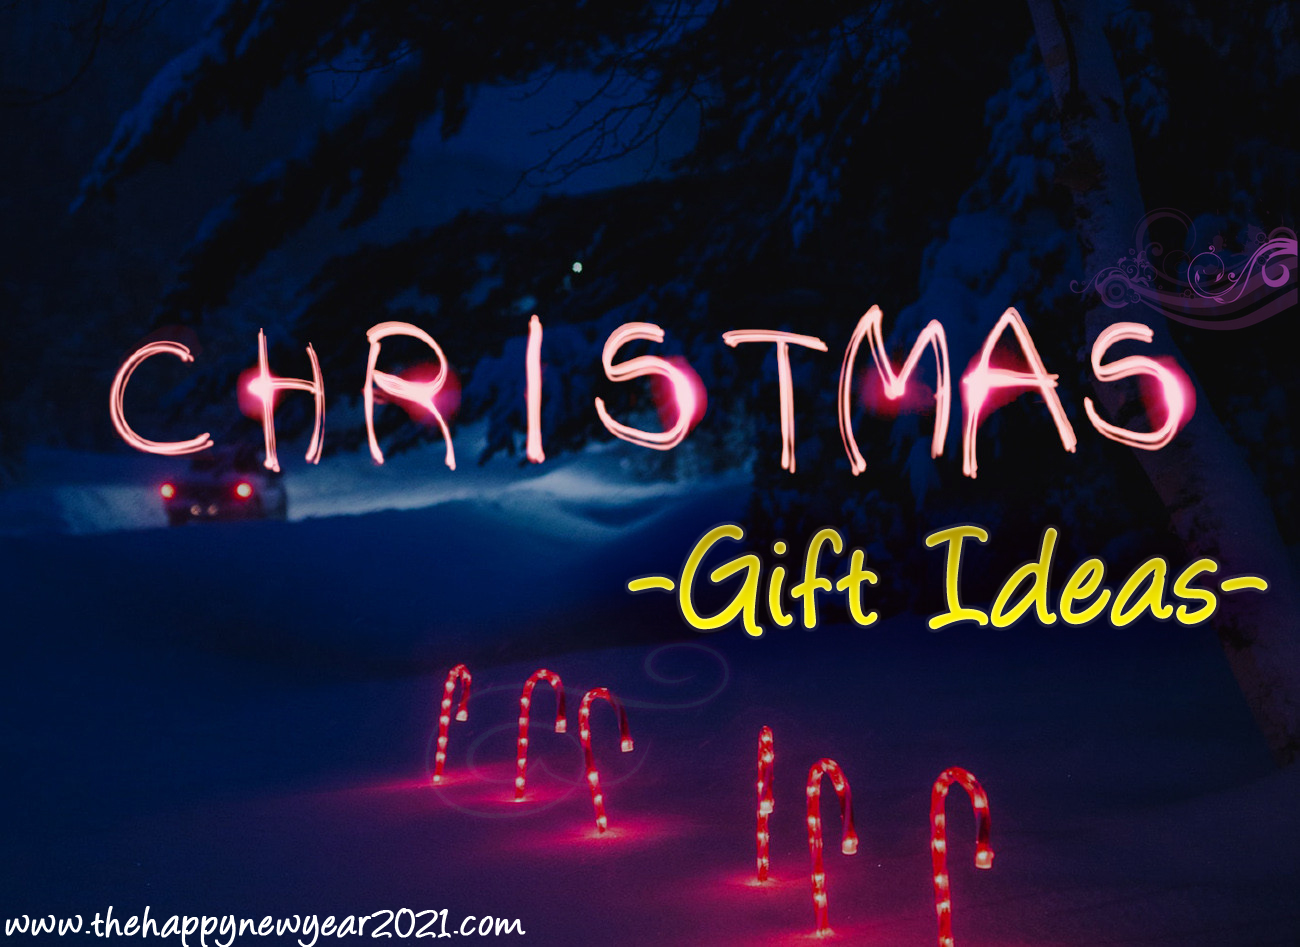 Best Merry Christmas 2020 Gifts Idea